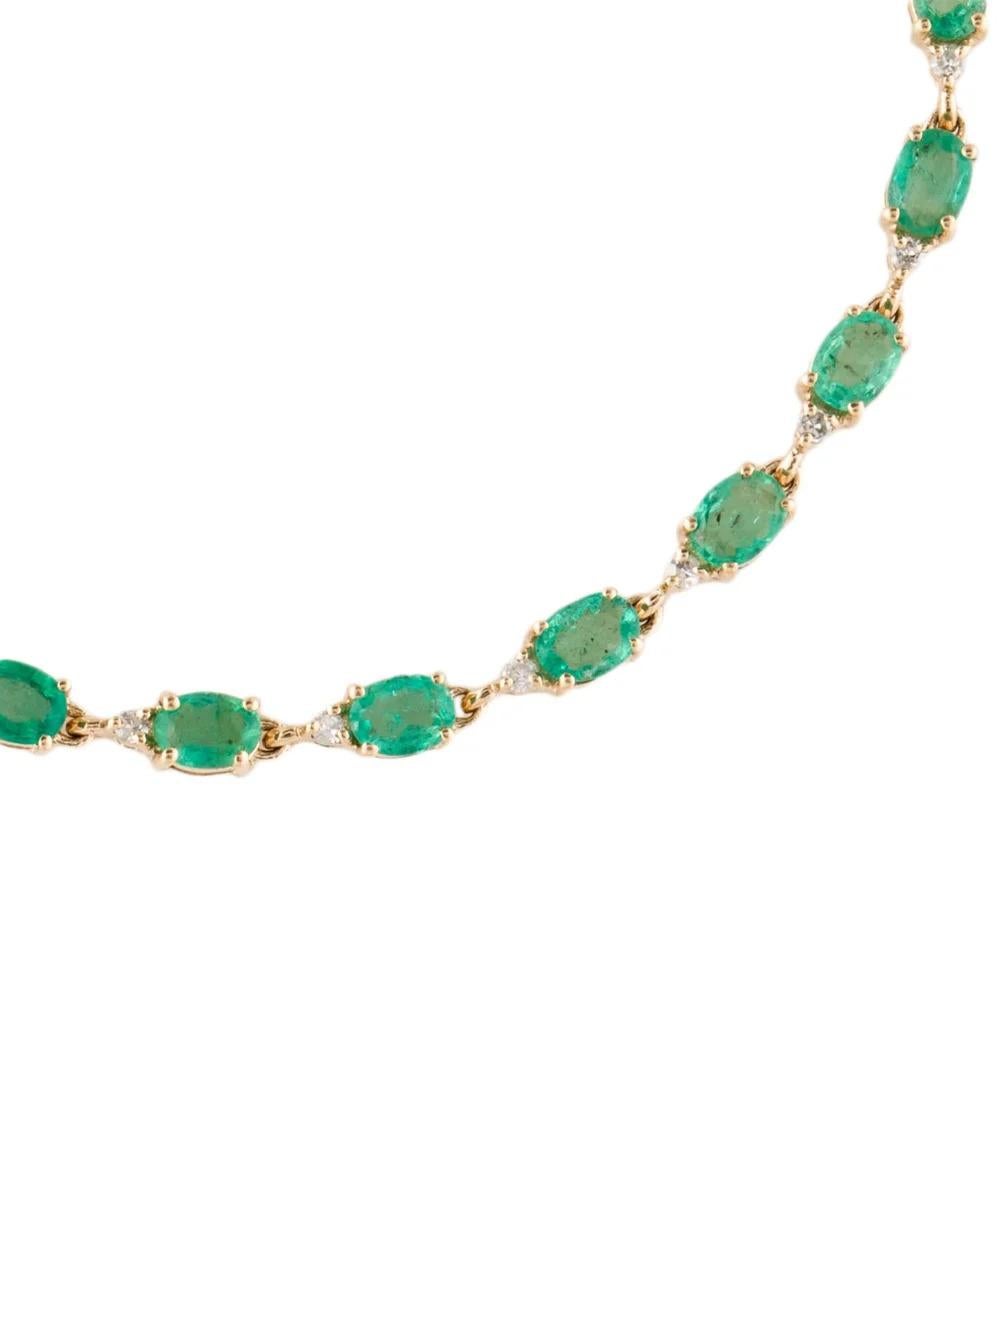 14K Emerald & Diamond Link Bracelet, 2.70ctw, Elegant Design, Timeless Beauty In New Condition For Sale In Holtsville, NY